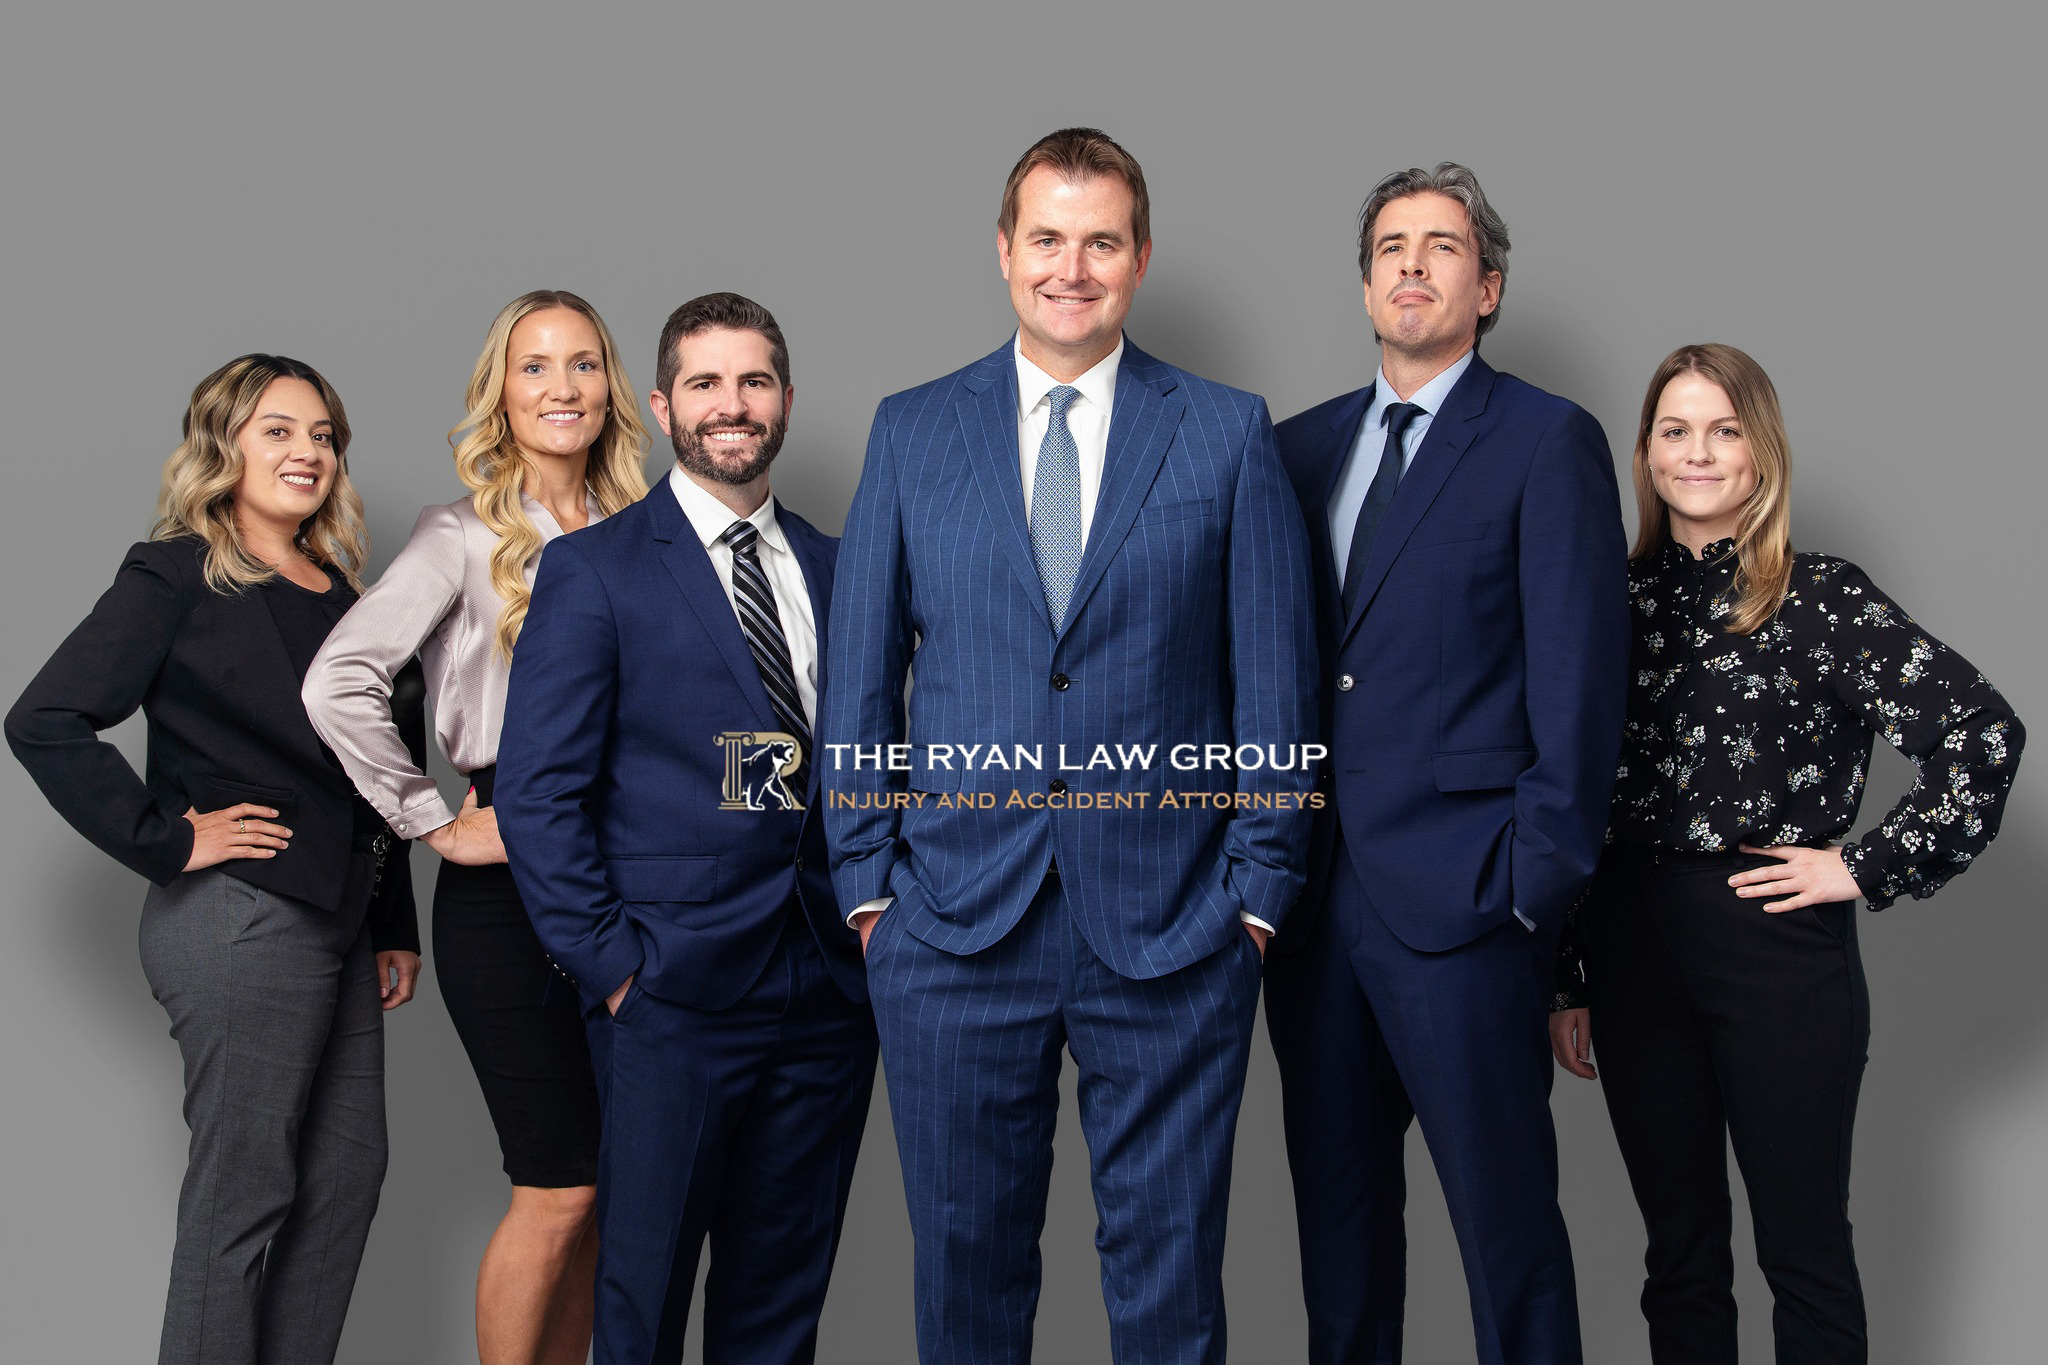 The Ryan Law Group Injury and Accident Attorneys | 4900 California Ave #210b, Bakersfield, CA 93309, United States | Phone: (661) 463-9073